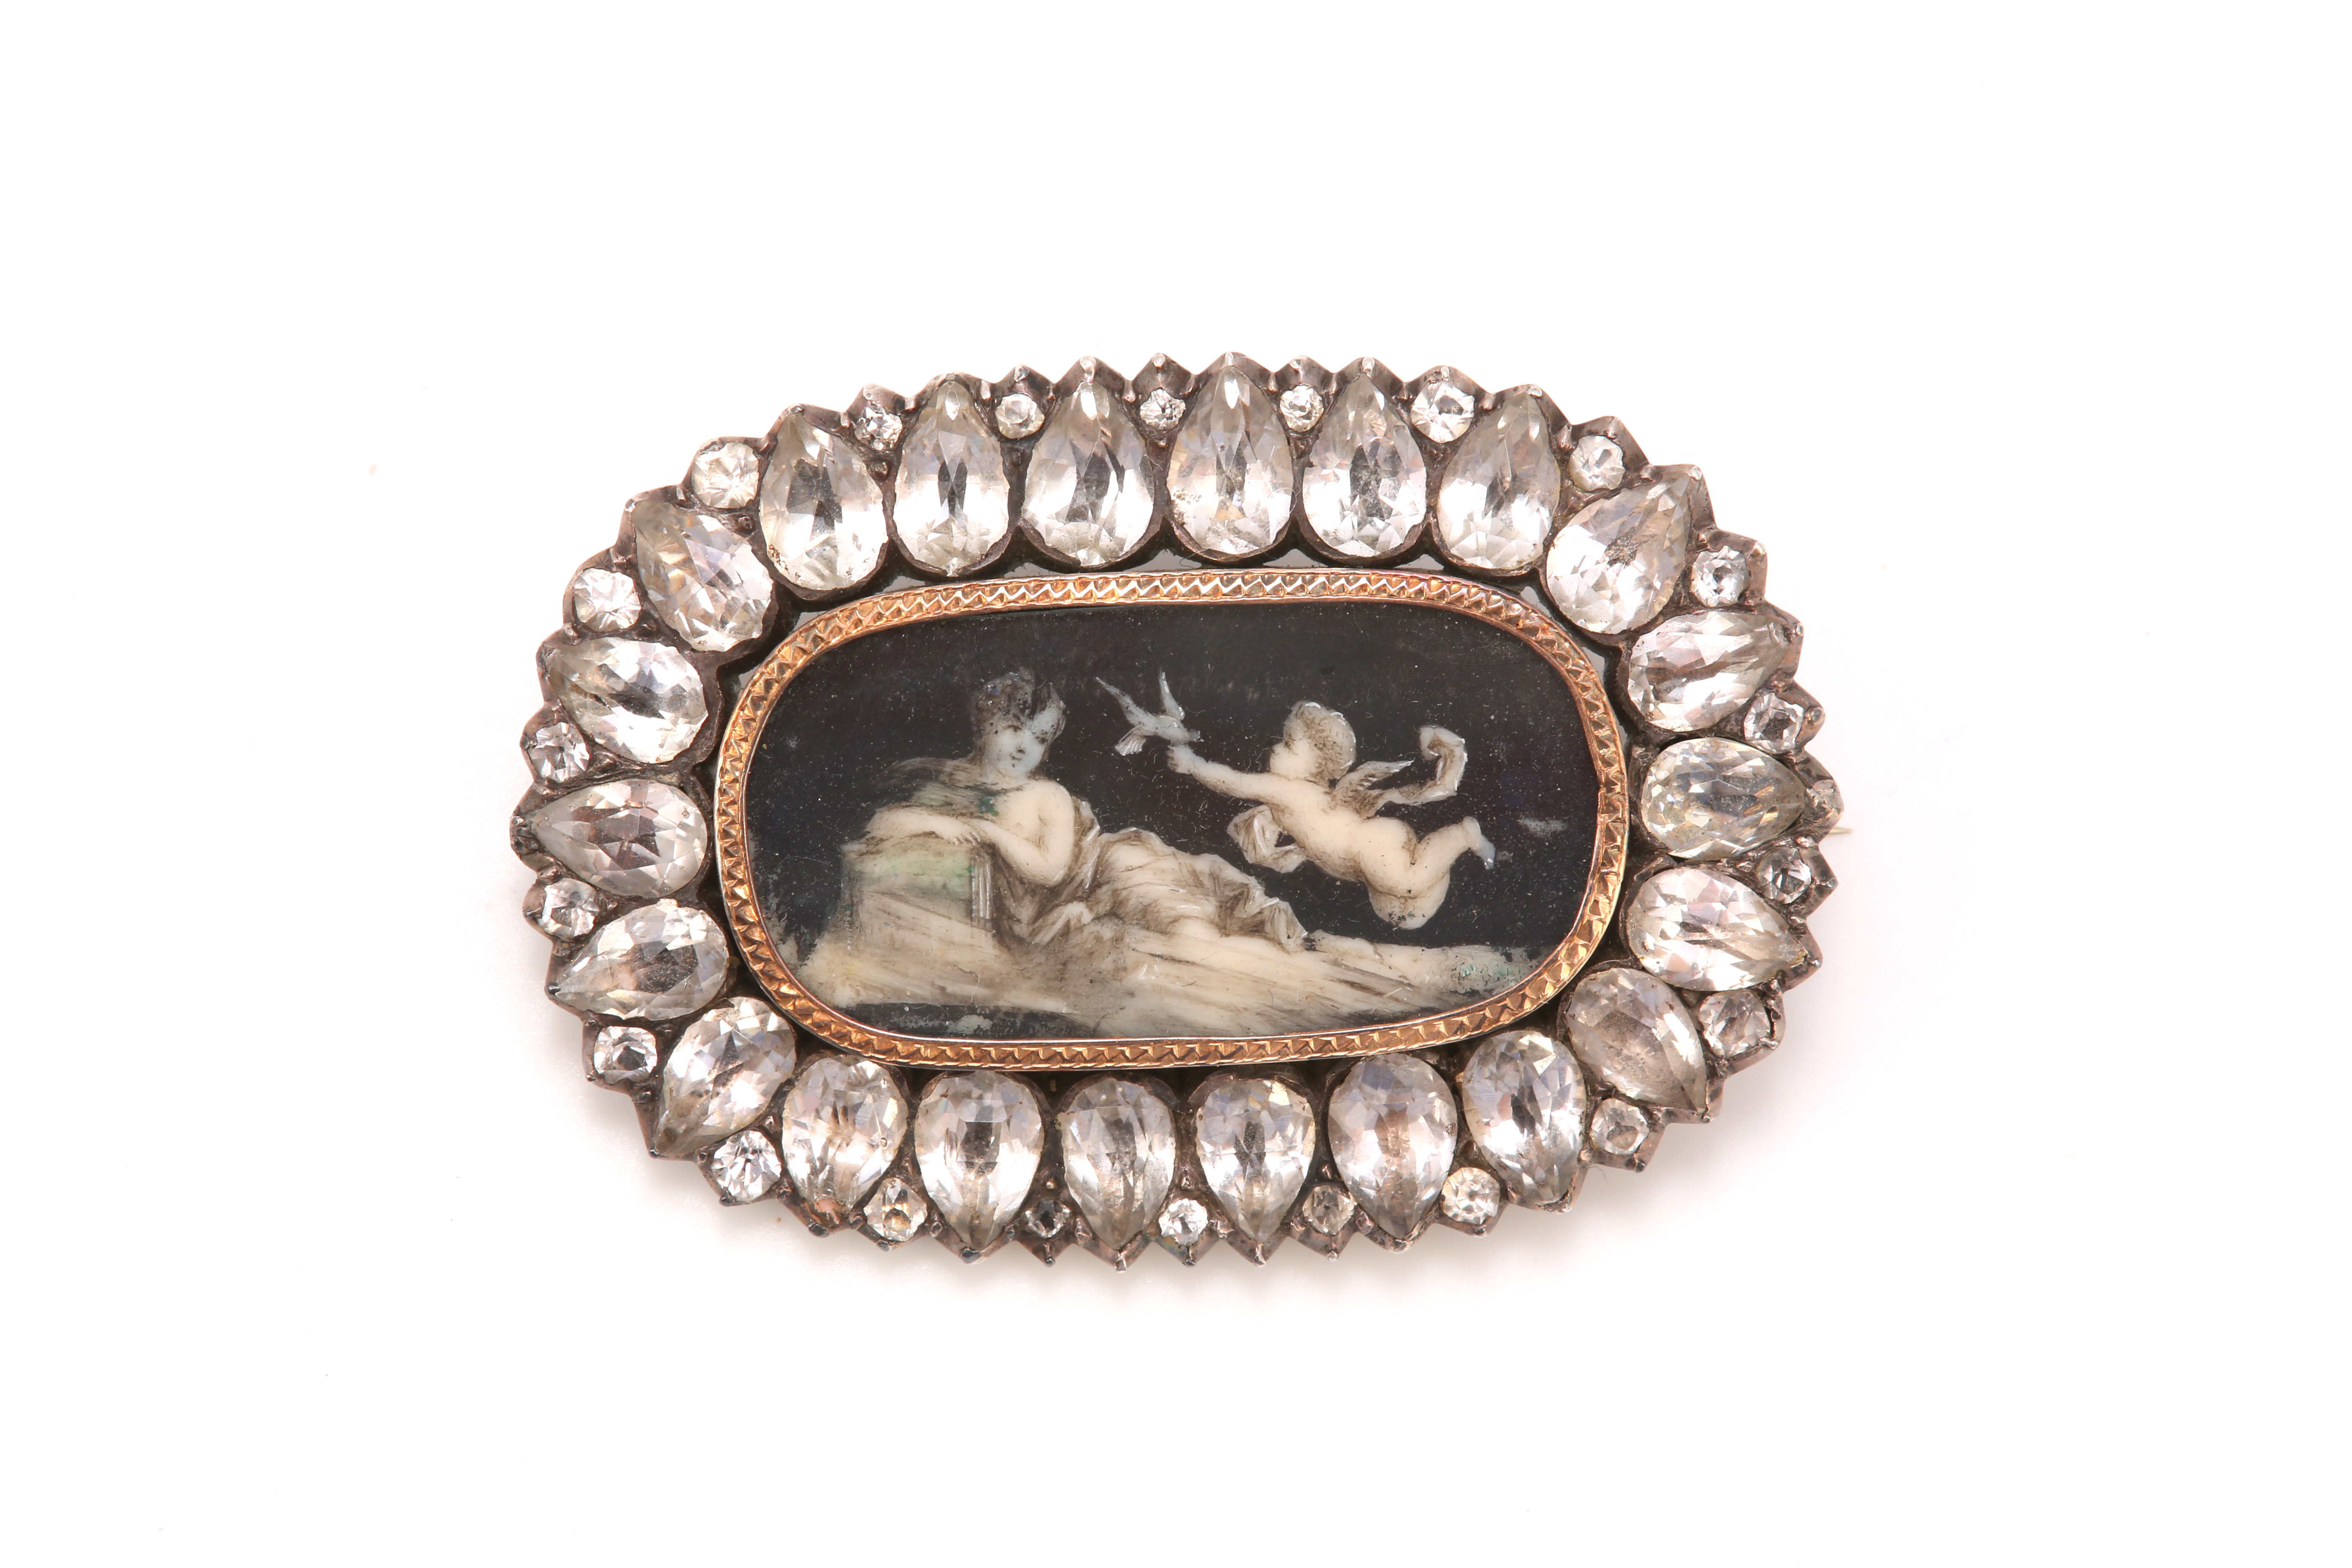 A paste mourning brooch, circa 1875, The oval ivory plaque depicting a woman reclining with a cherub